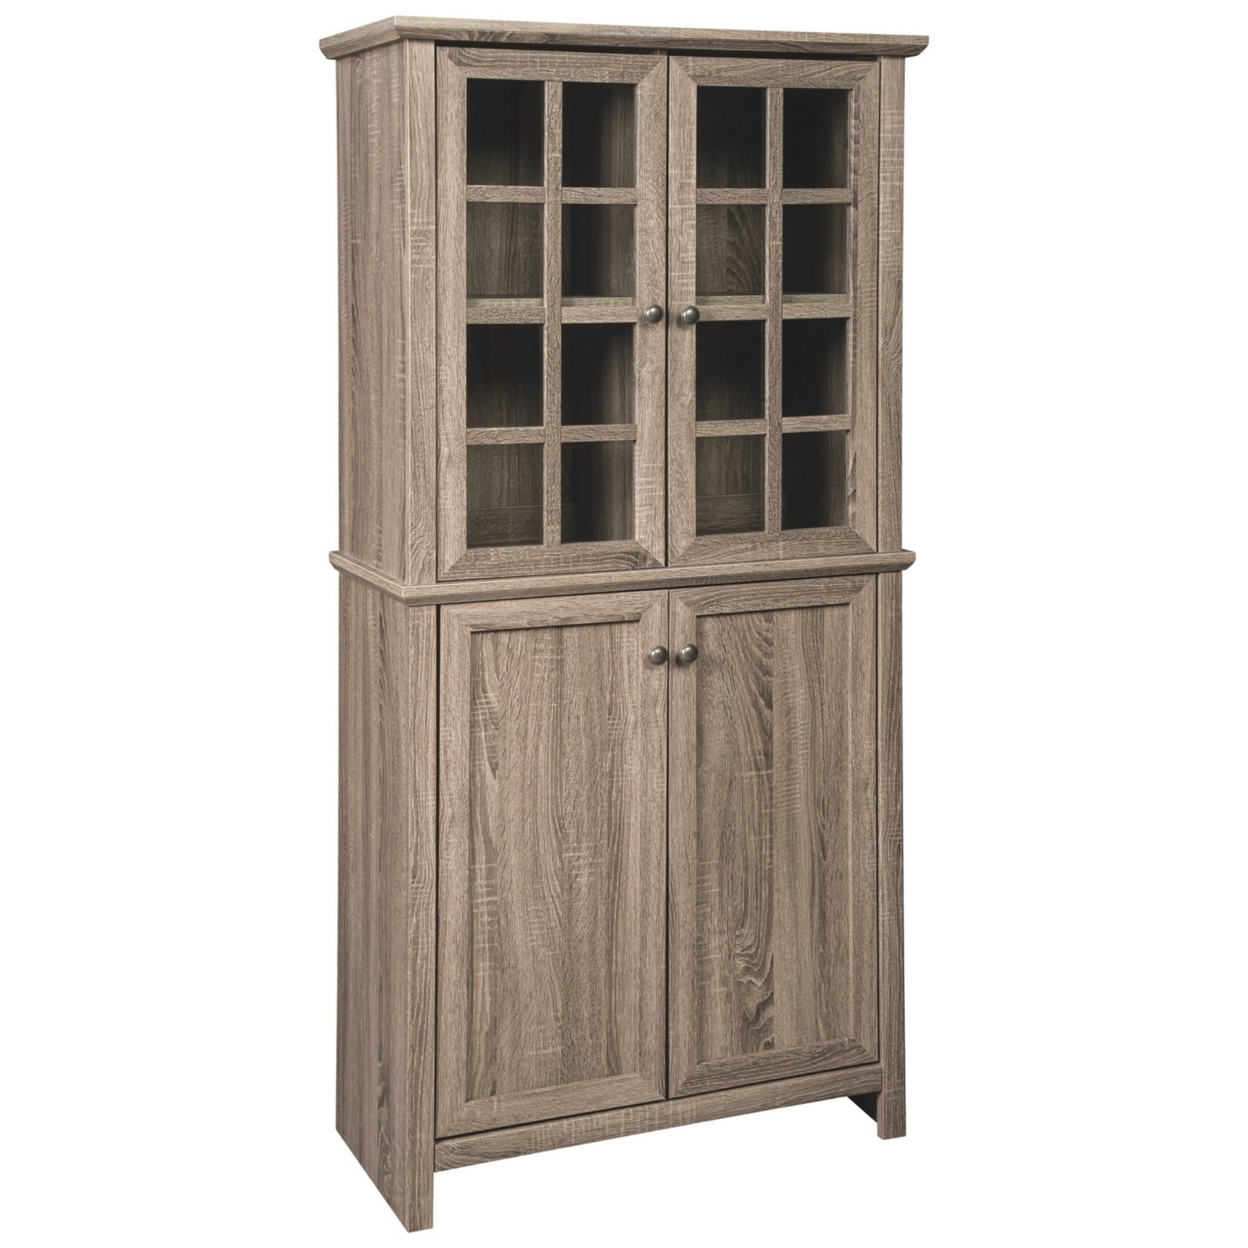 71 Inches 2 Glass Insert And 2 Closed Door Wooden Accent Cabinet, Brown- Saltoro Sherpi